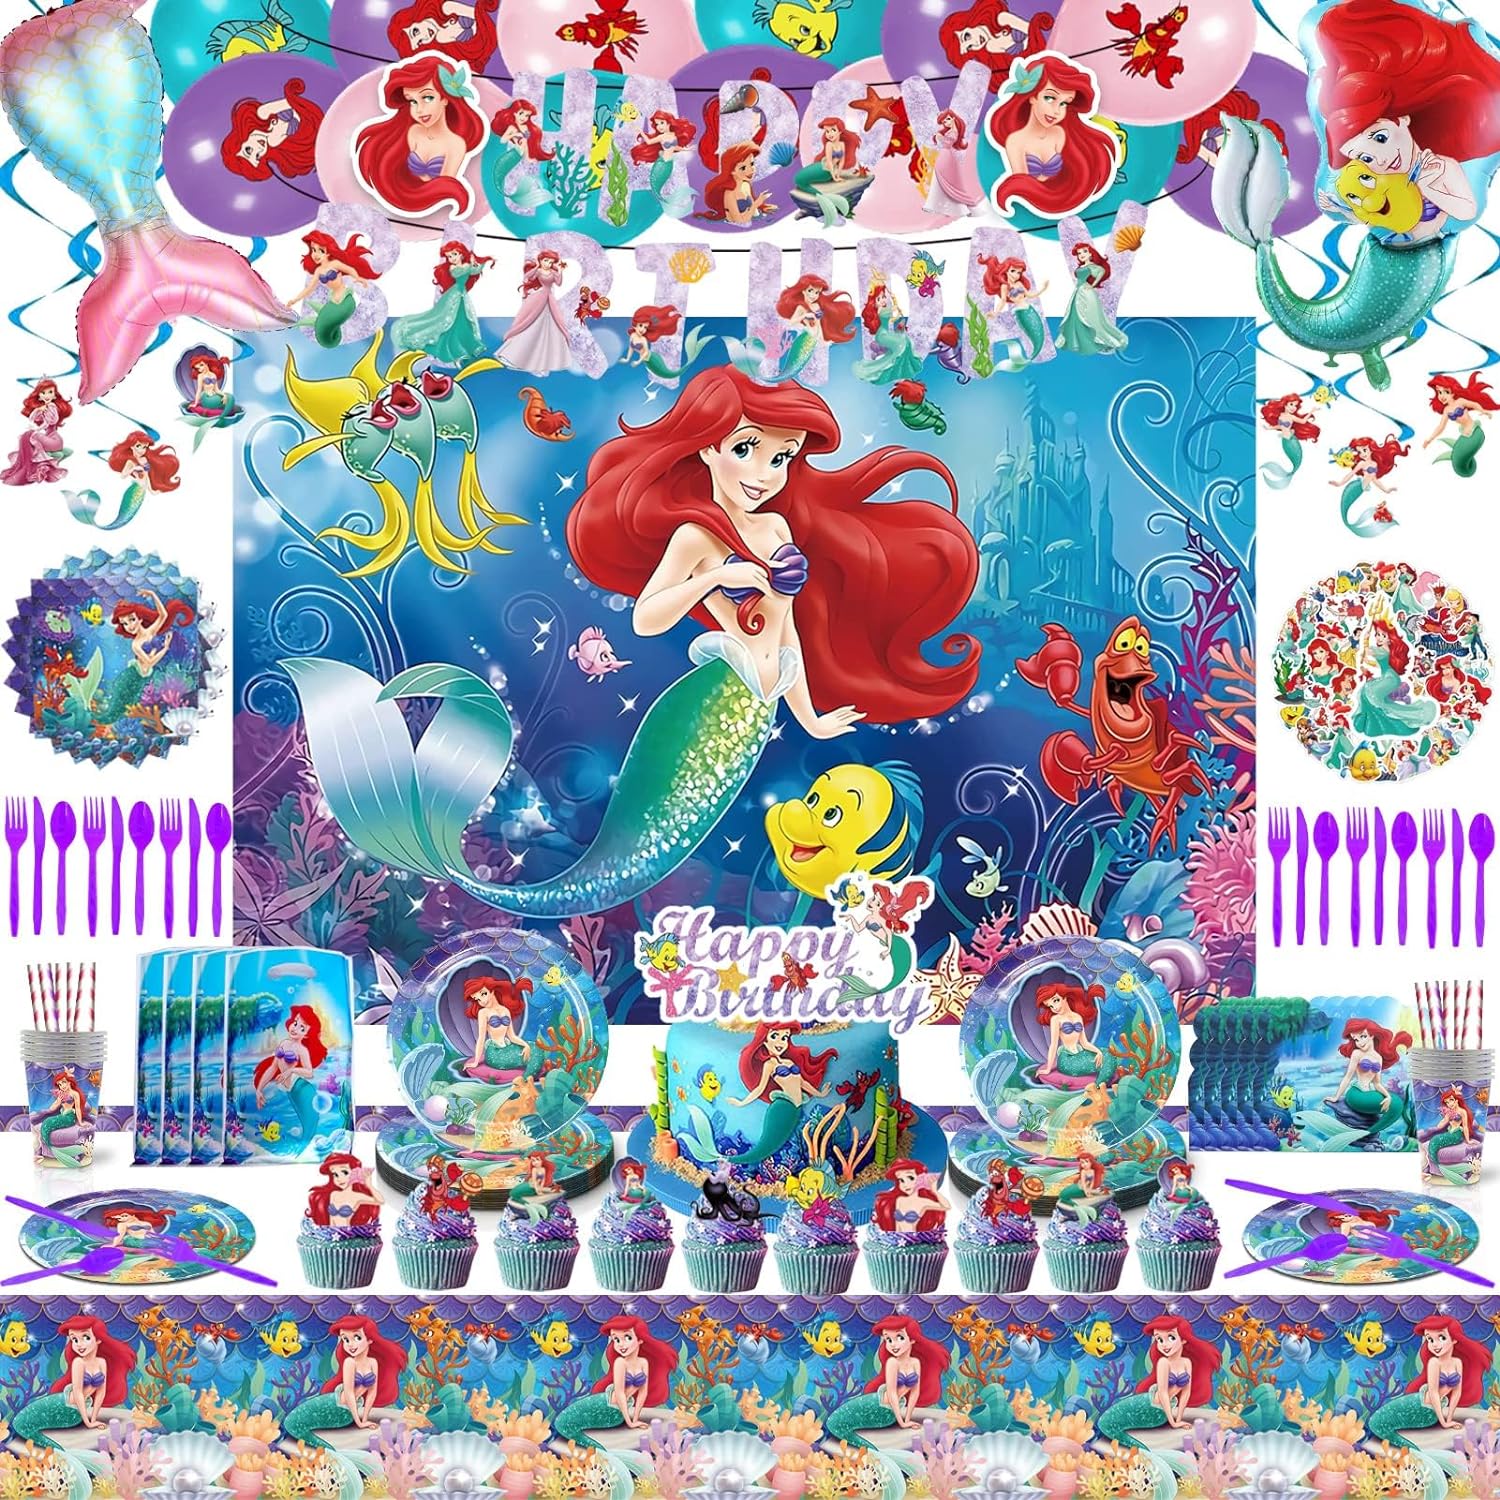 Throwing a Disney Little Mermaid Party: Tips and Ideas for a Magical Under-the-Sea Celebration!